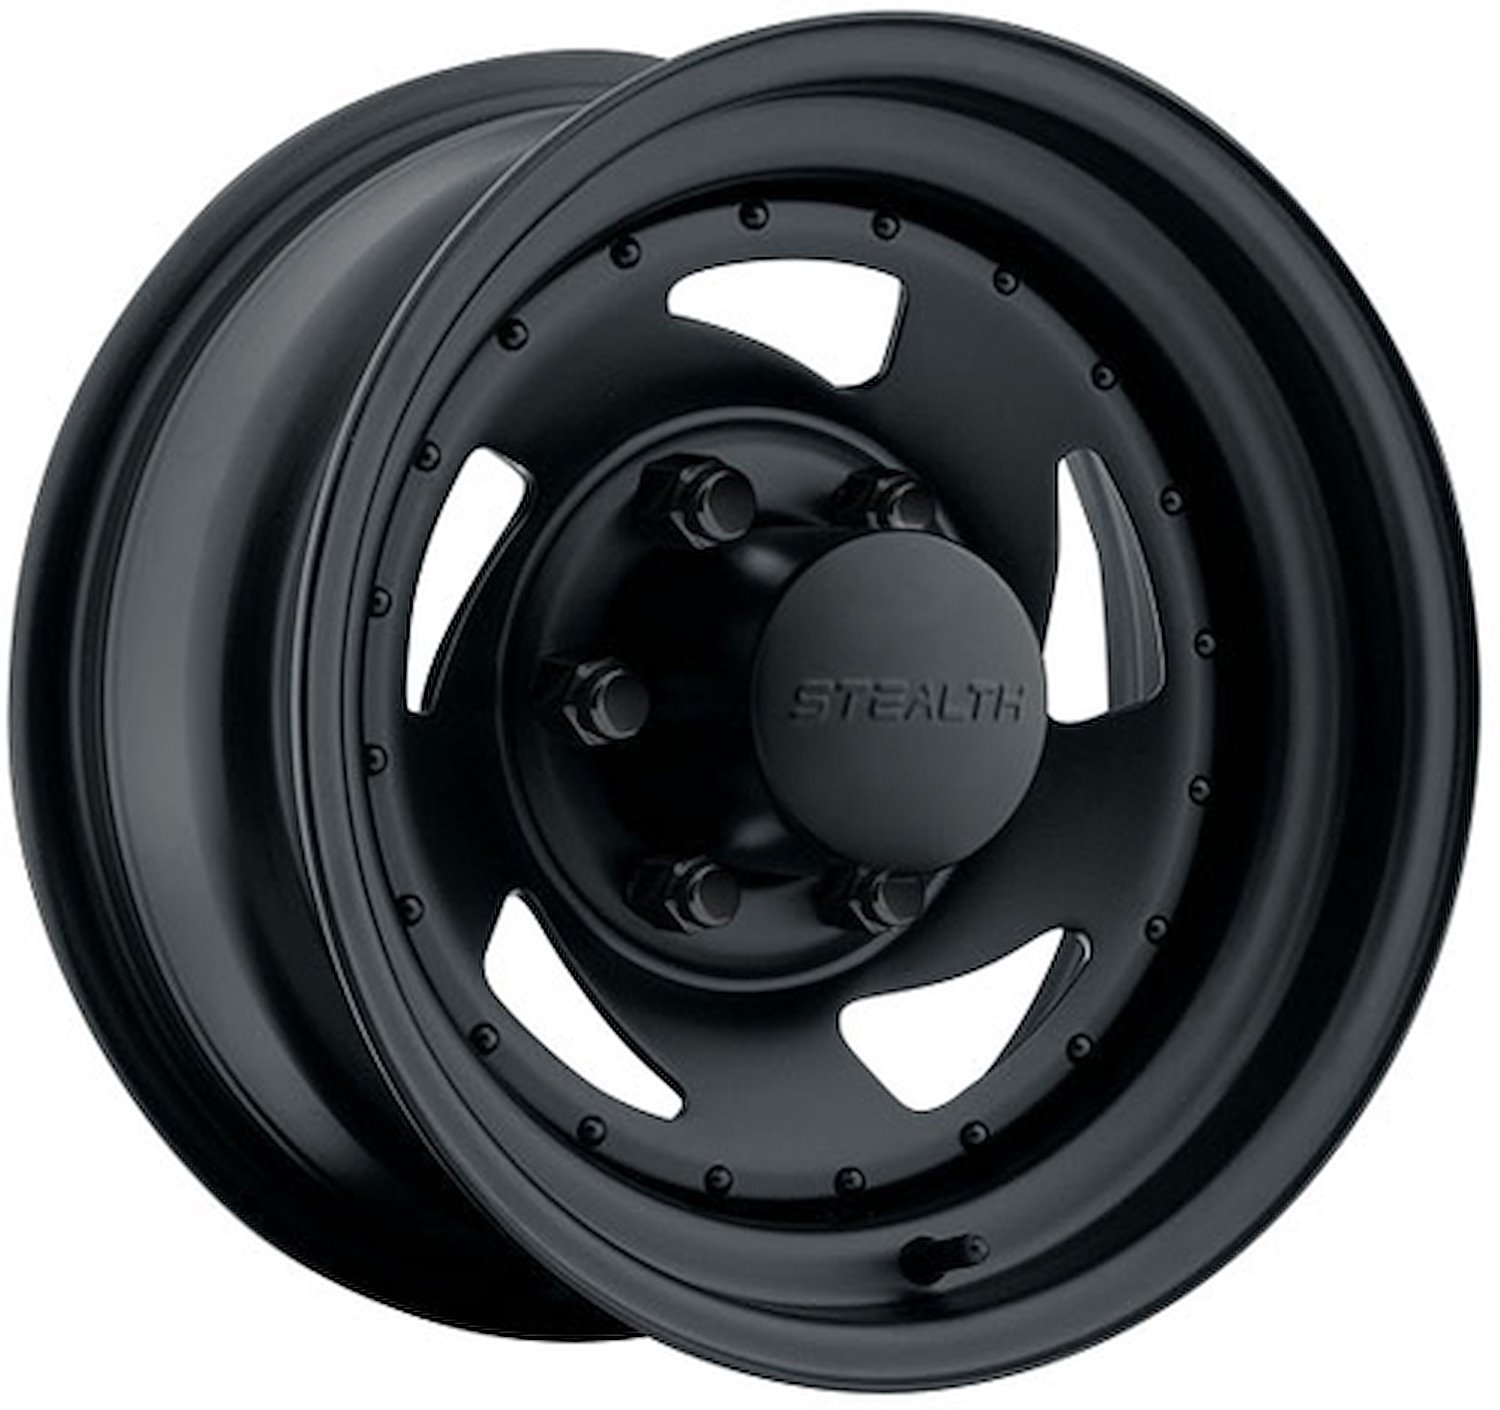 STEALTH BLACK BLADE 15 x 8 5 x 5 Bolt Circle 375 Back Spacing 19 offset 33 Center Bore 1500 lbs Load Rating